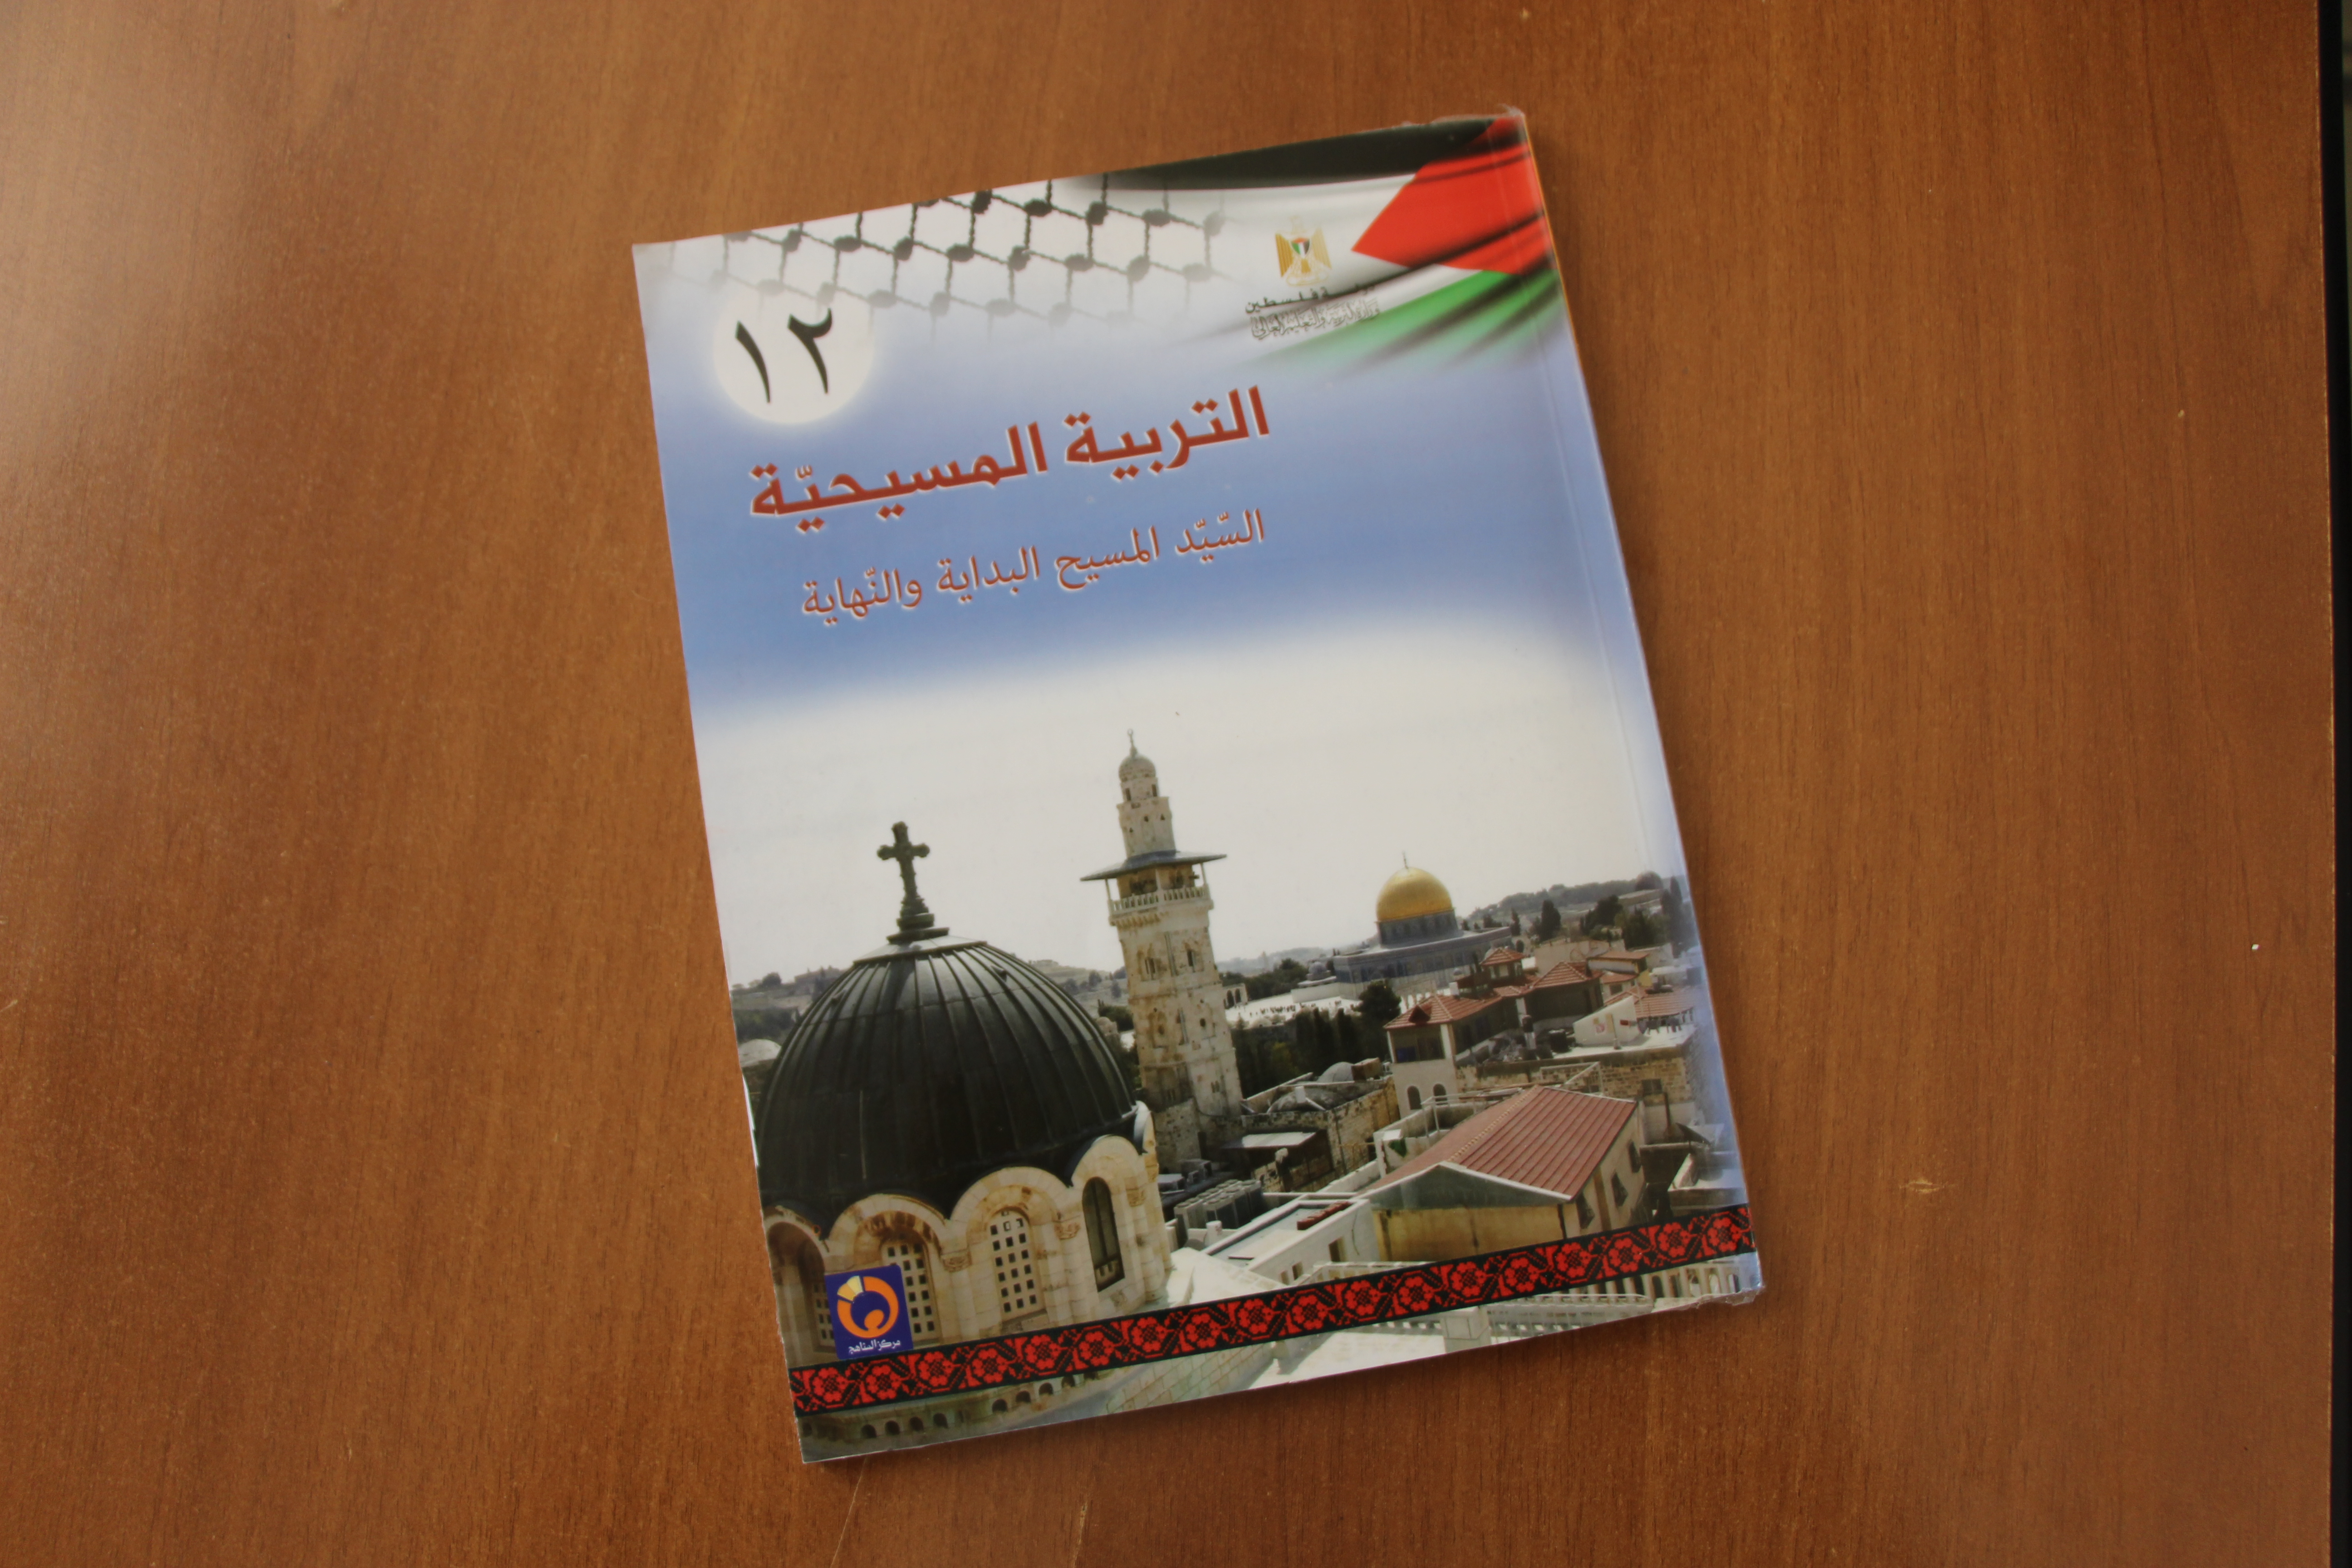 Christian Education is Recognized as a Formal Curriculum in High Schools in Palestine!